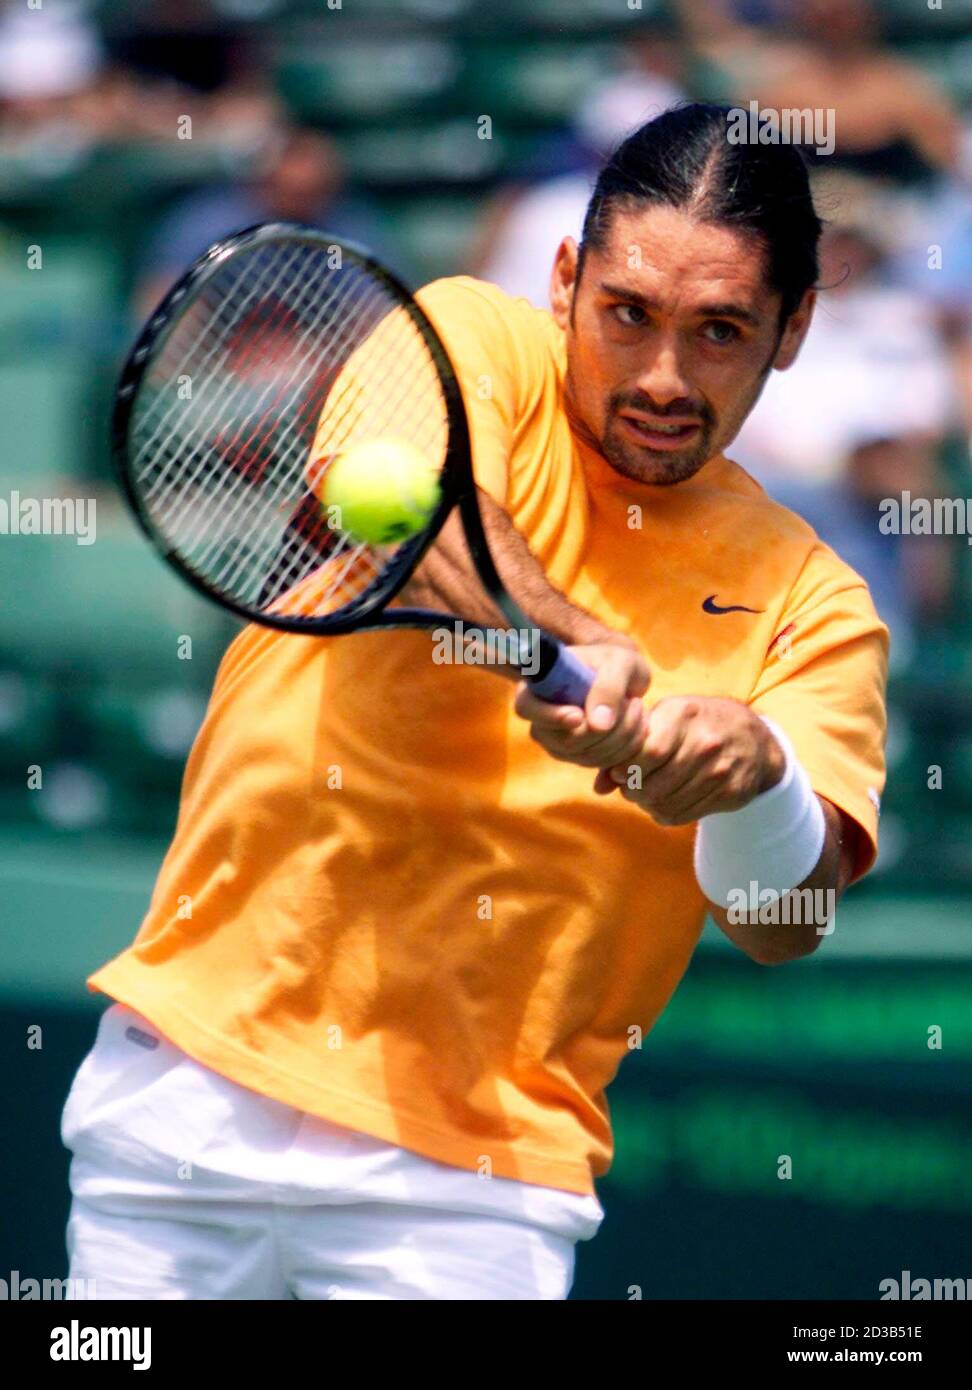 Chilean Marcelo Rios returns serve to American Andre Agassi in the first  set of their semifinal men's tennis match at the Nasdaq 100 Open March 29,  2002 in Key Biscayne, Florida. REUTERS/Marc